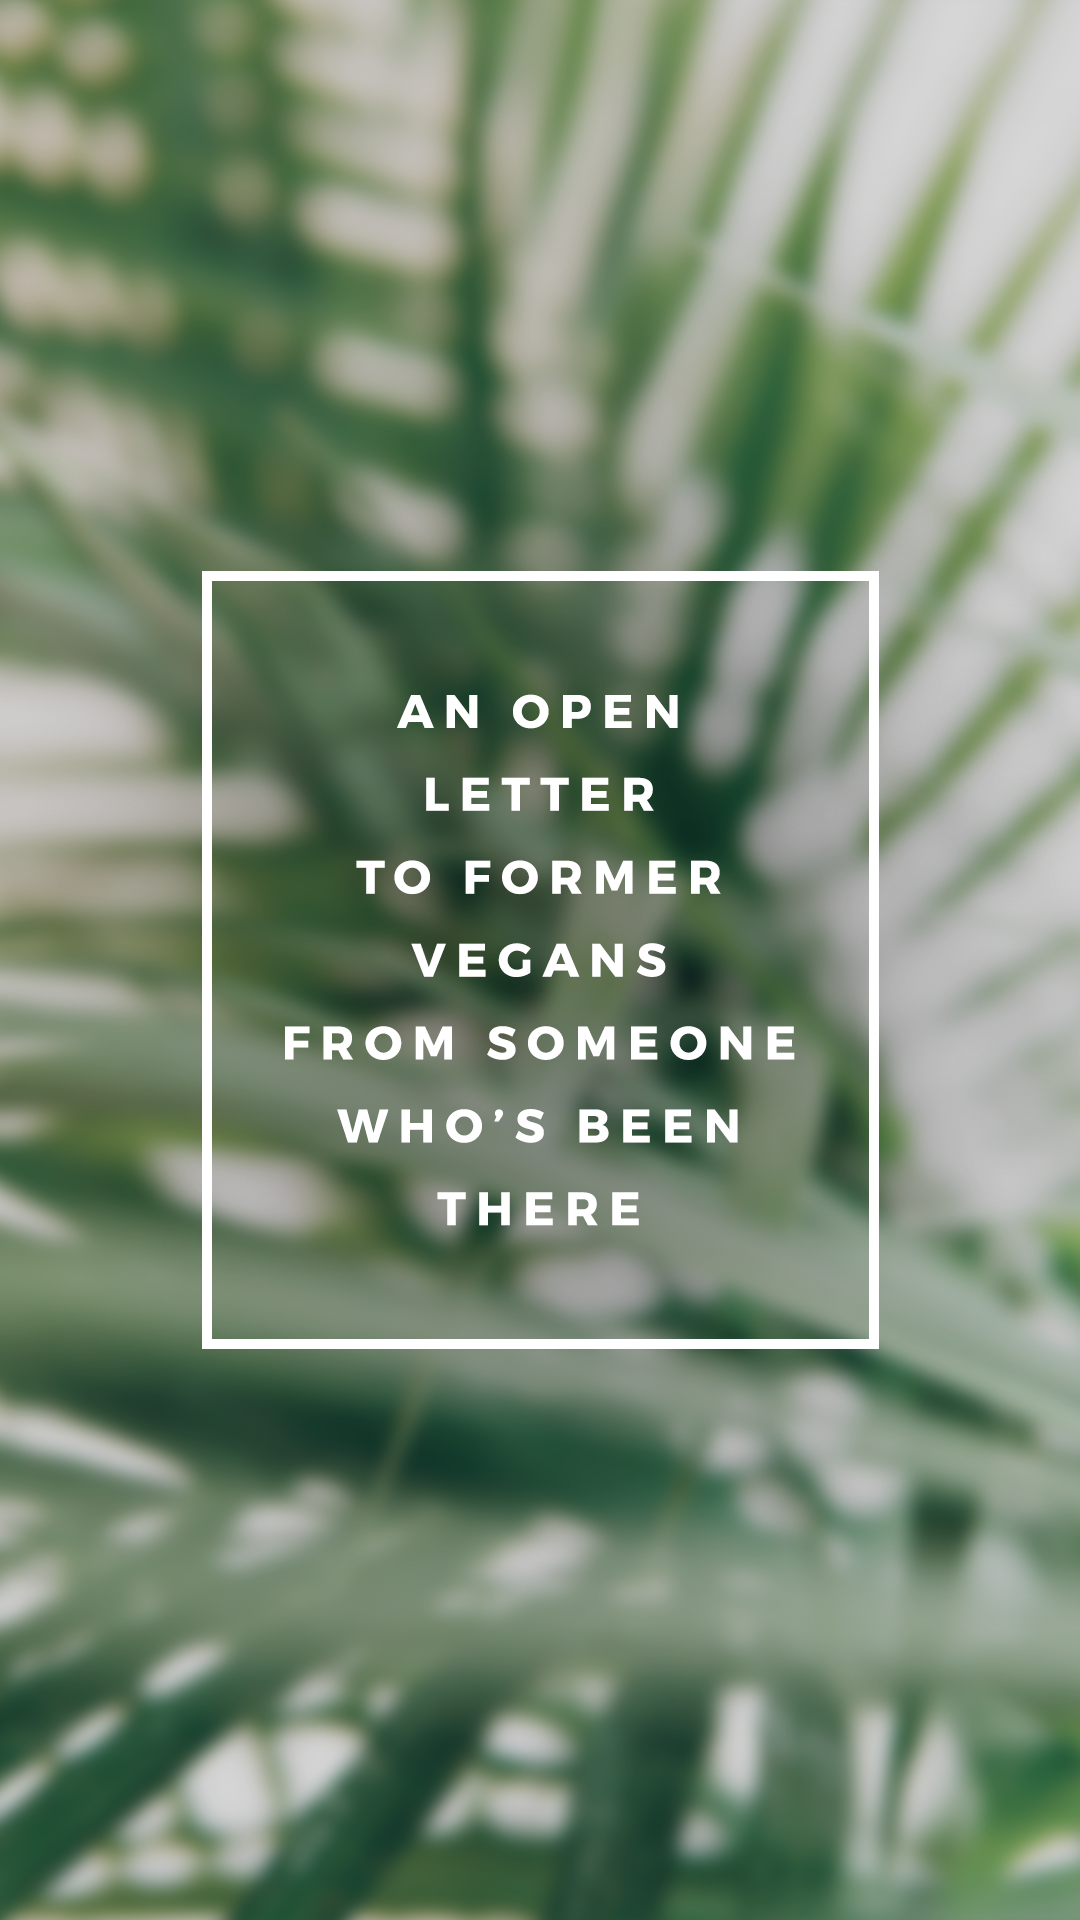 An Open Letter to Former Vegans From Someone Who’s Been There